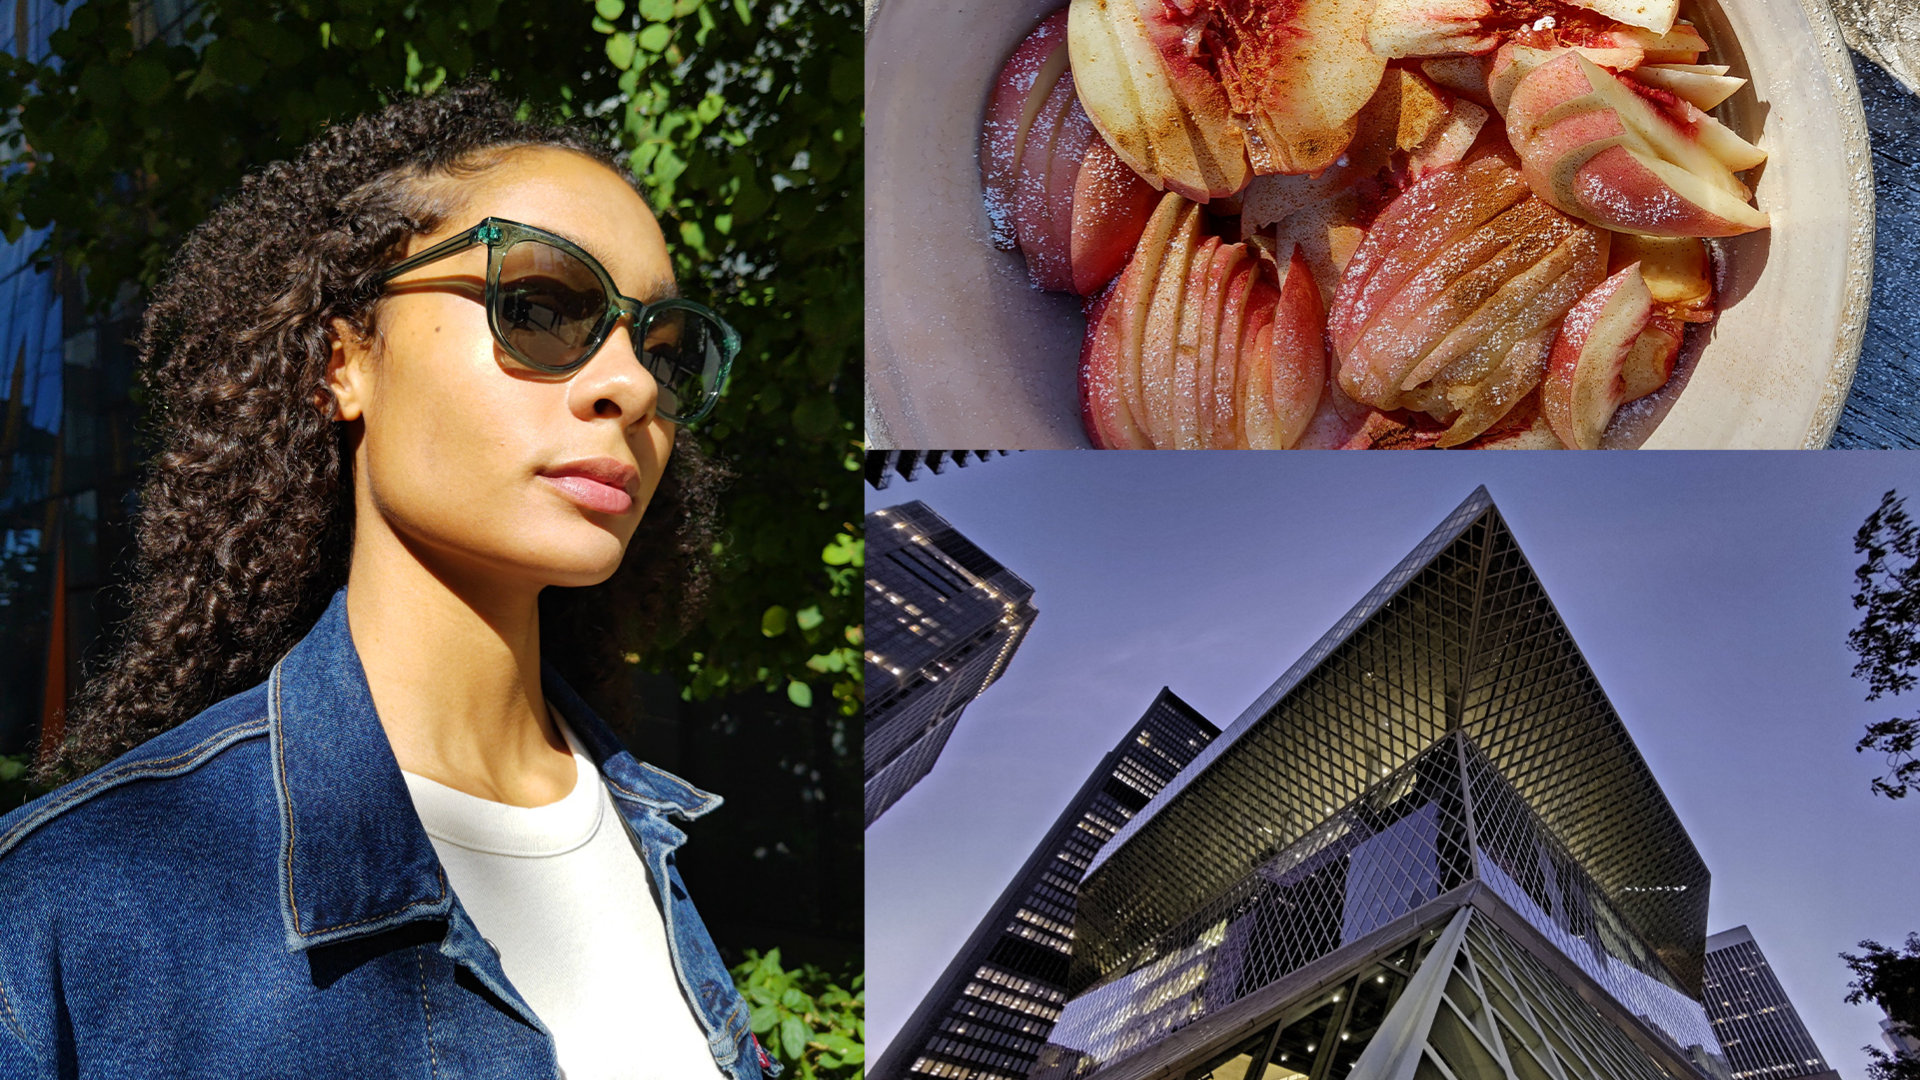 Three high-definition photos of a person outside,  sliced fruit in a bowl, and the Seattle Public Library.